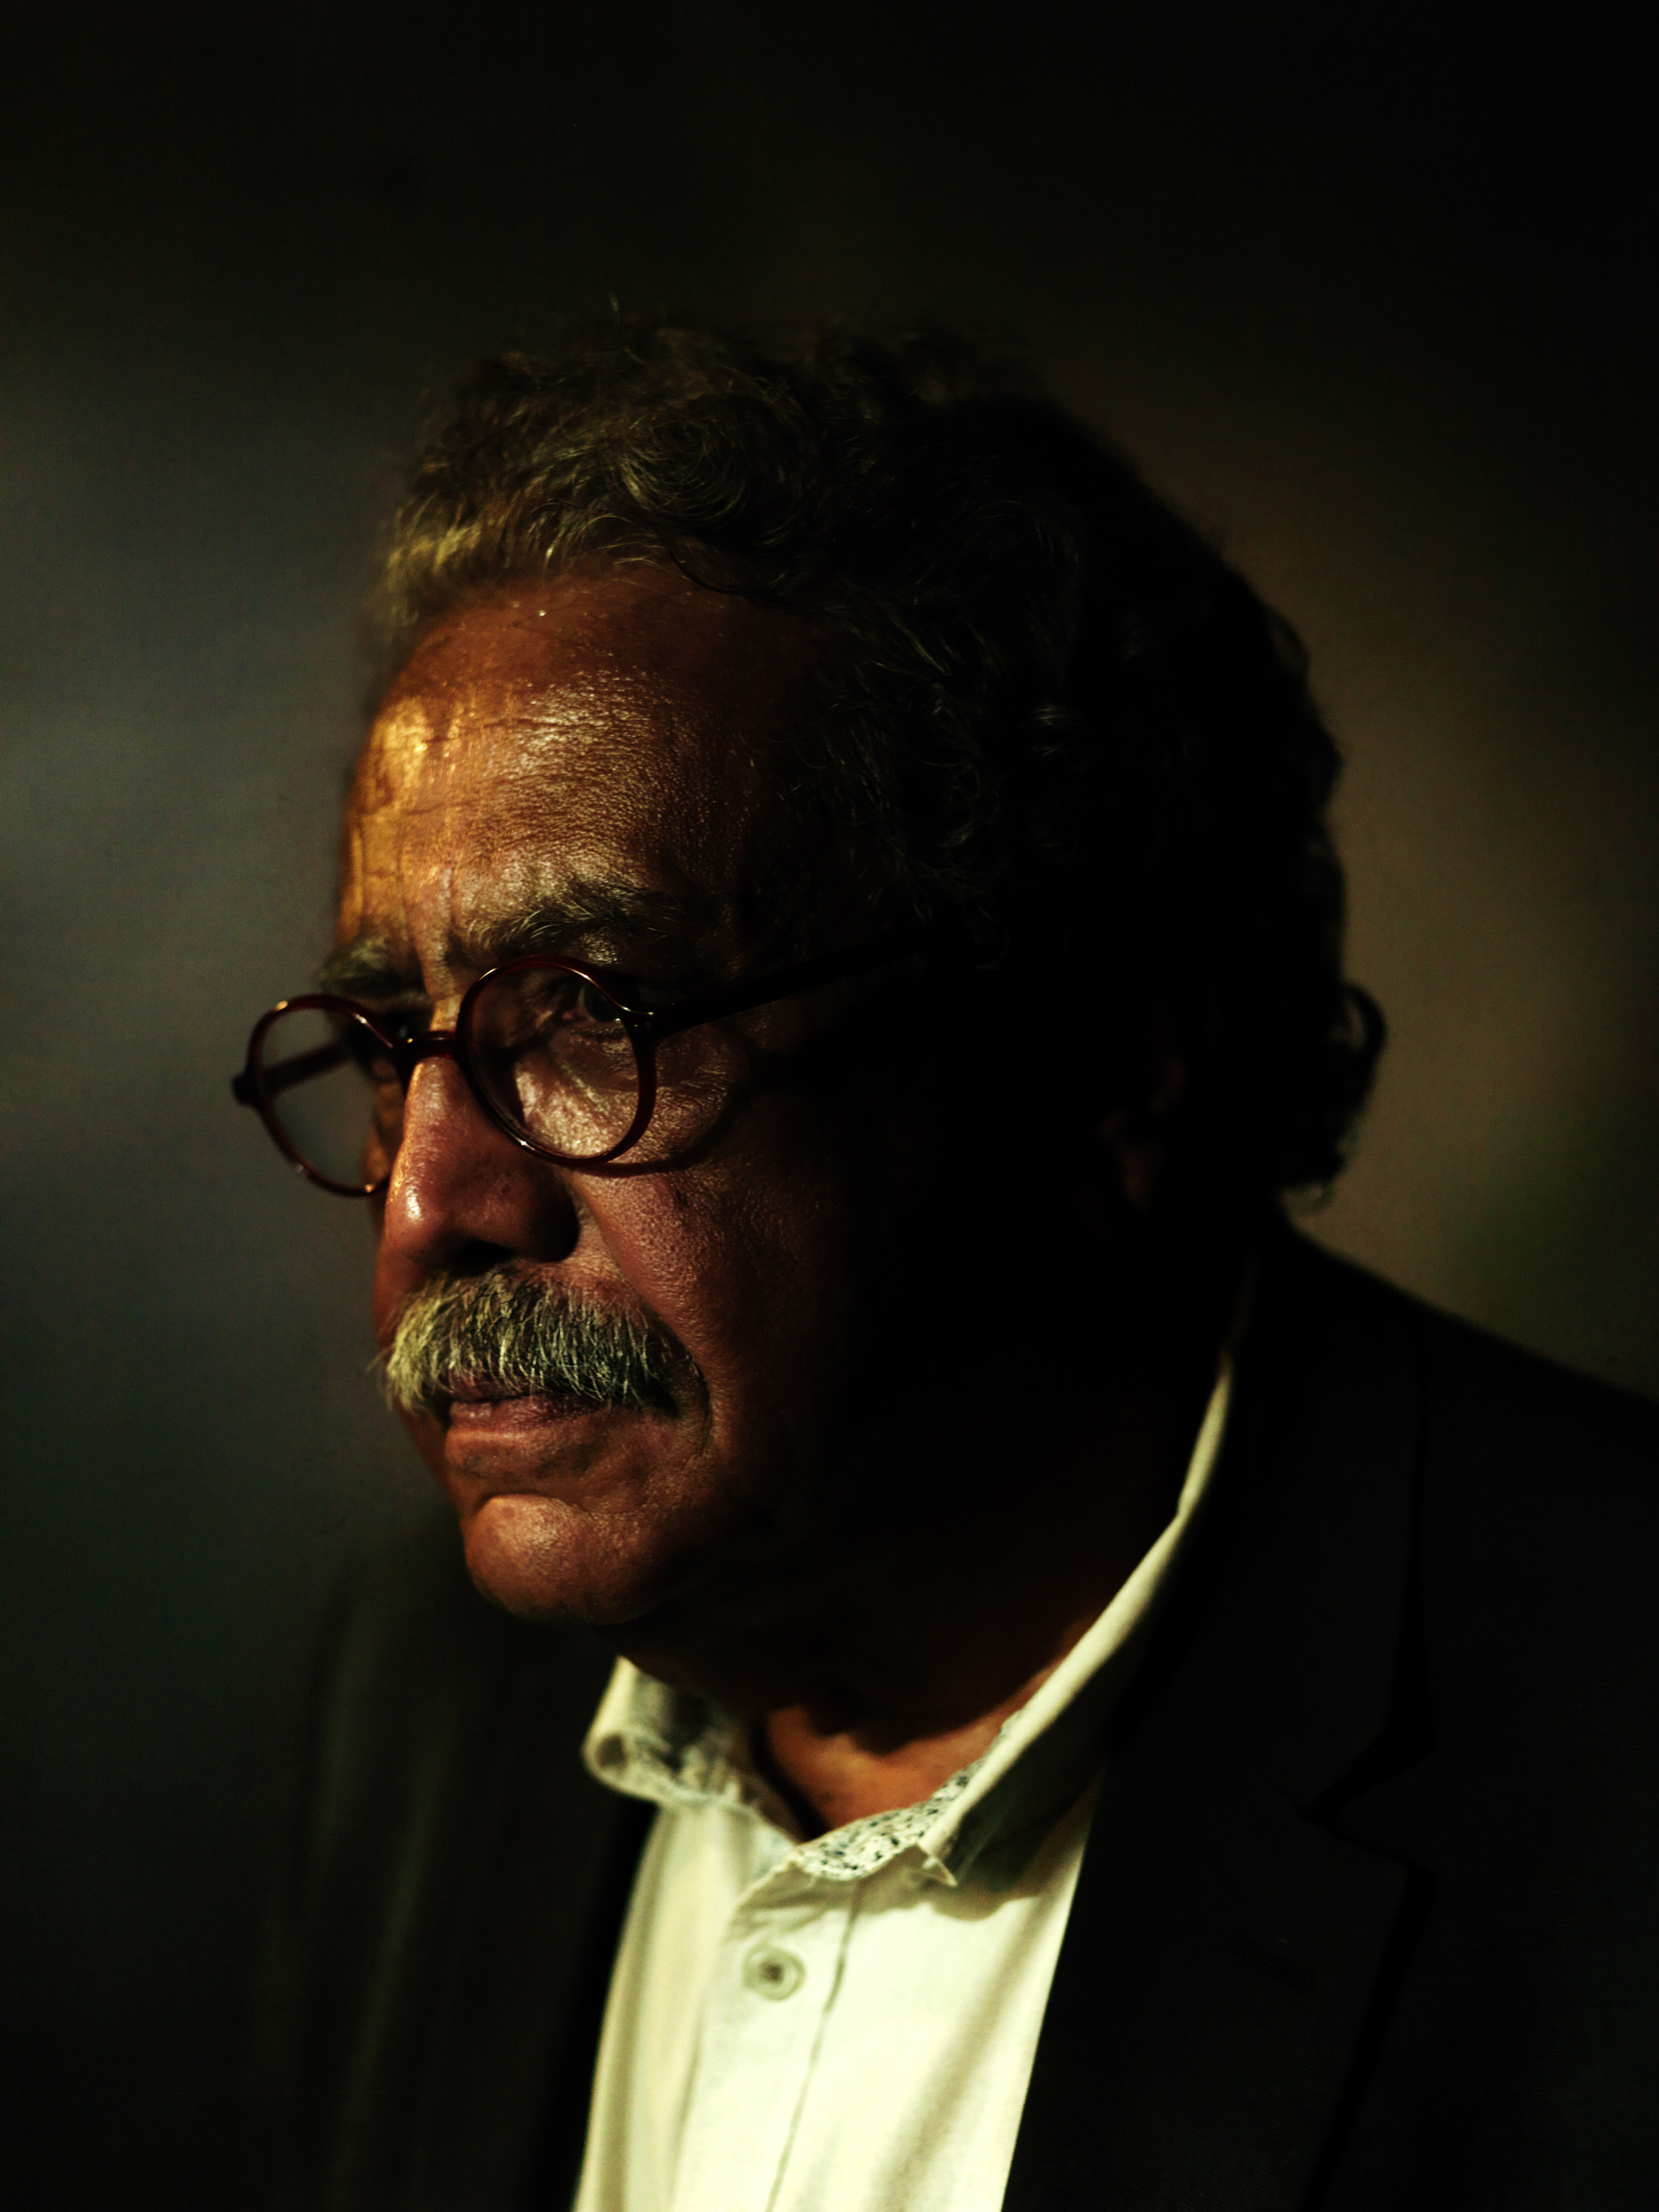 Hani Shukrallah, journalist and columnist at Ahram, has spent the lastfive years analyzing the political movements in Egypt. Cairo, Egypt, Oct. 18, 2015.